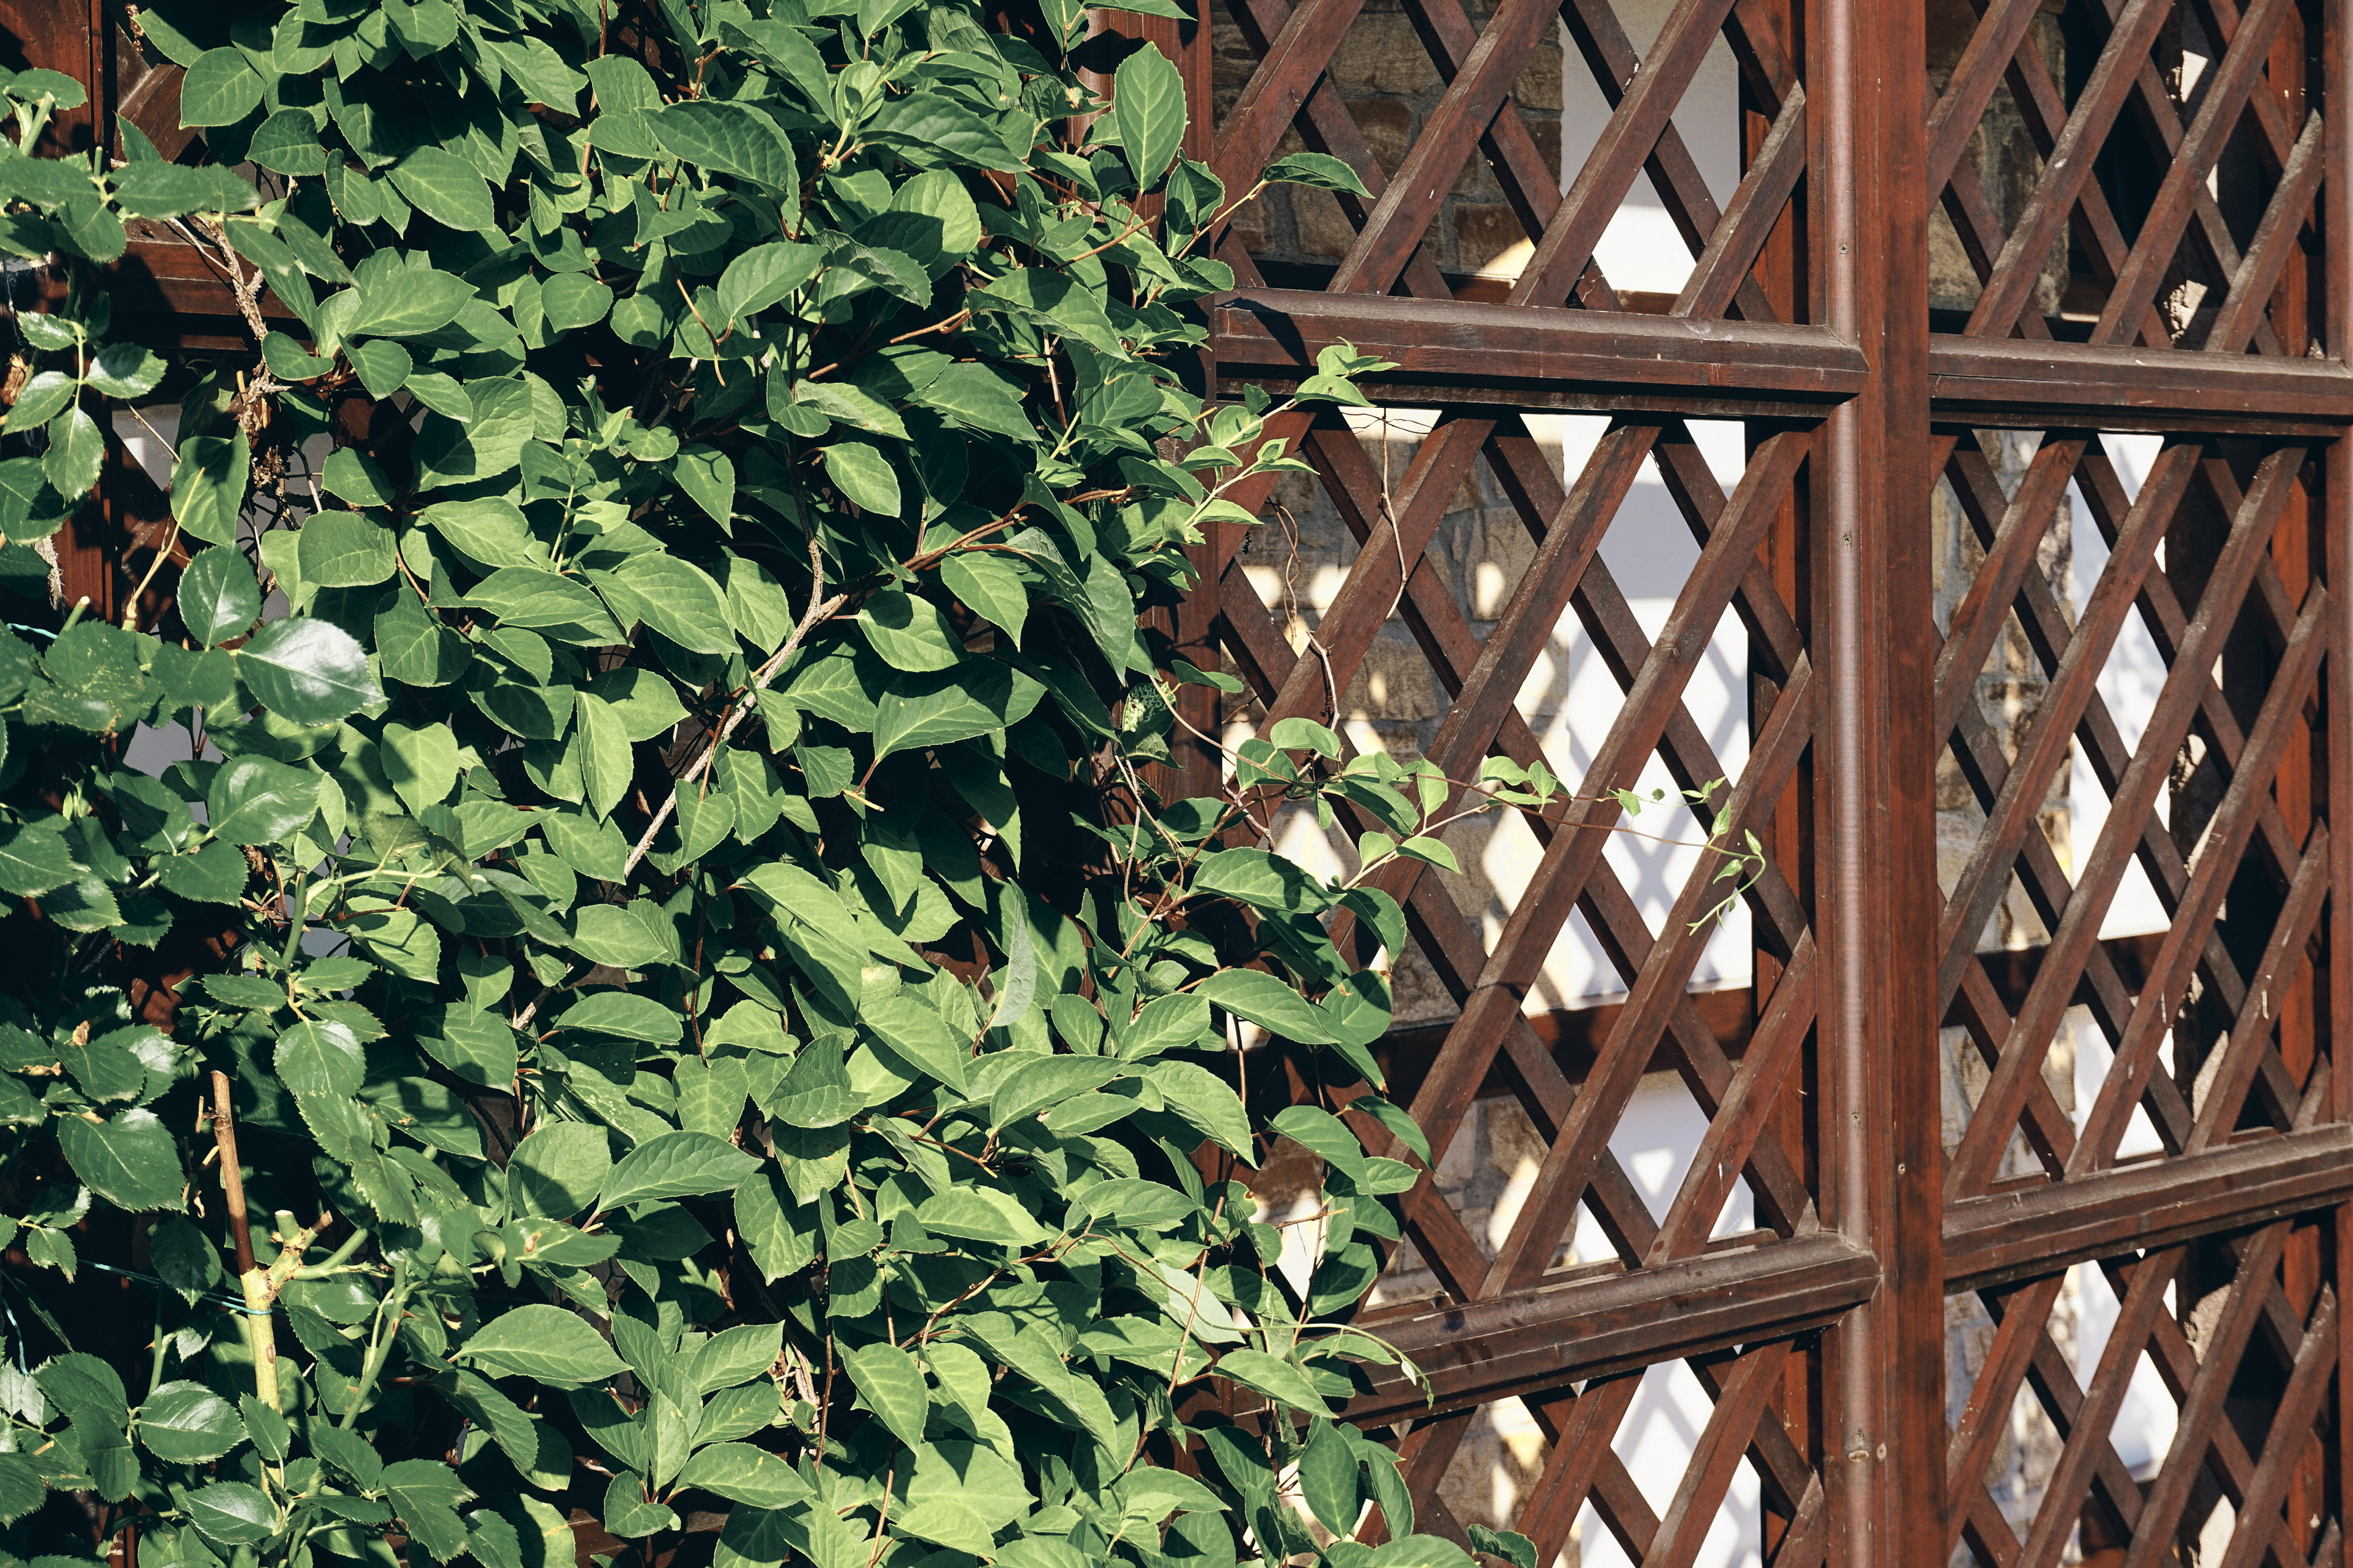 Wooden trellis with attached greenery adds privacy to a backyard